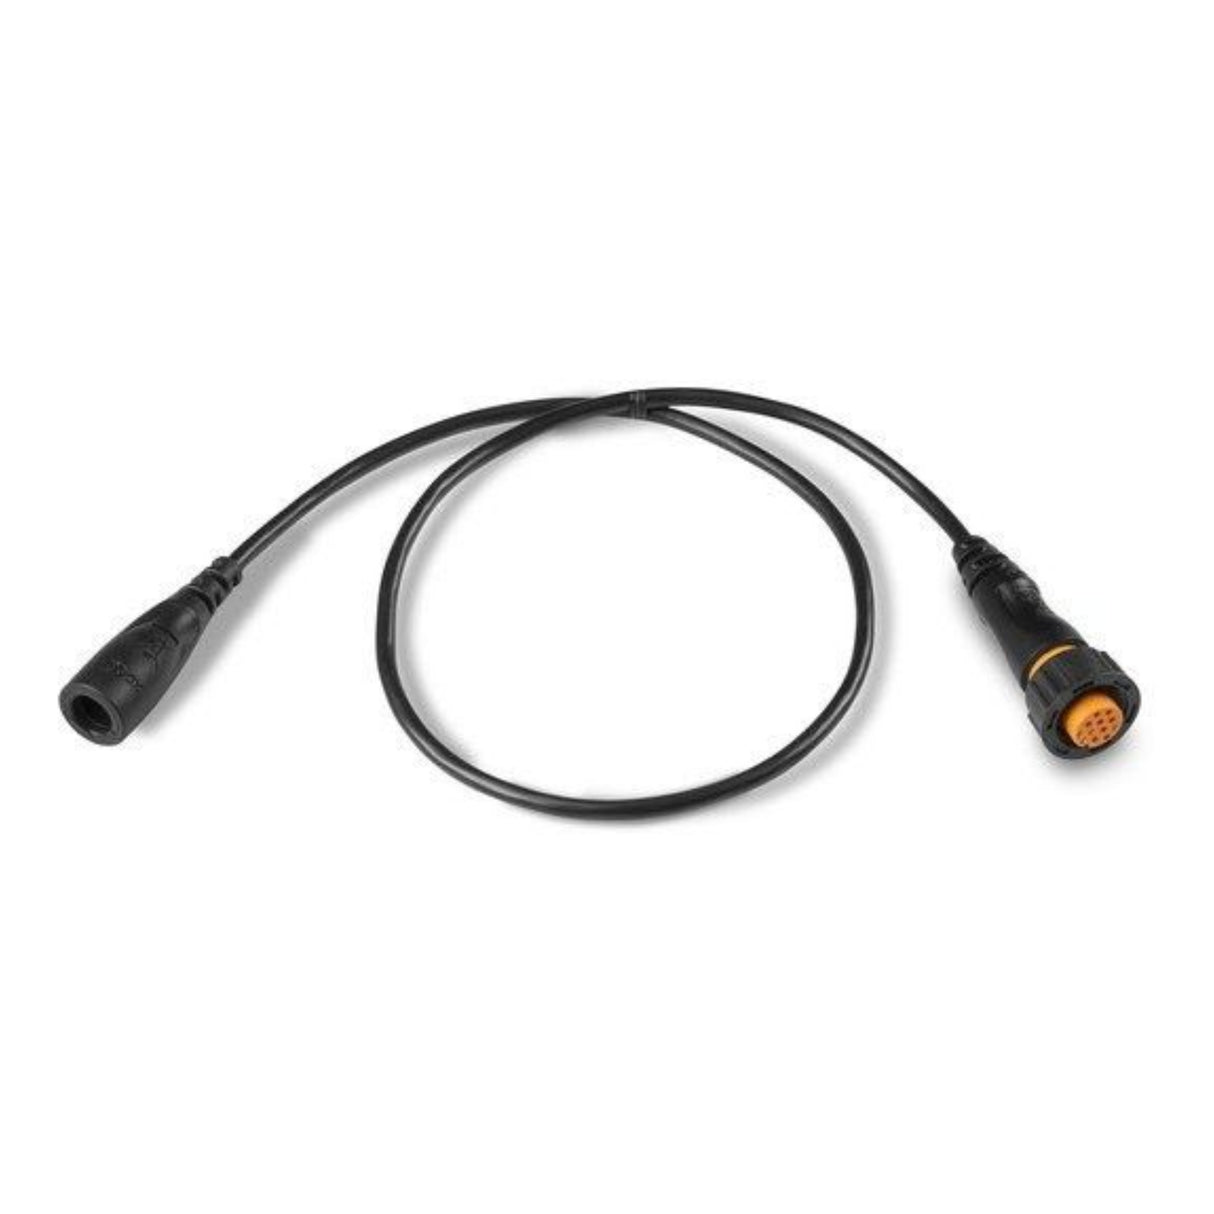 Garmin 4 Pin Transducer to 12 Pin Sounder Adapter Cable - PROTEUS MARINE STORE